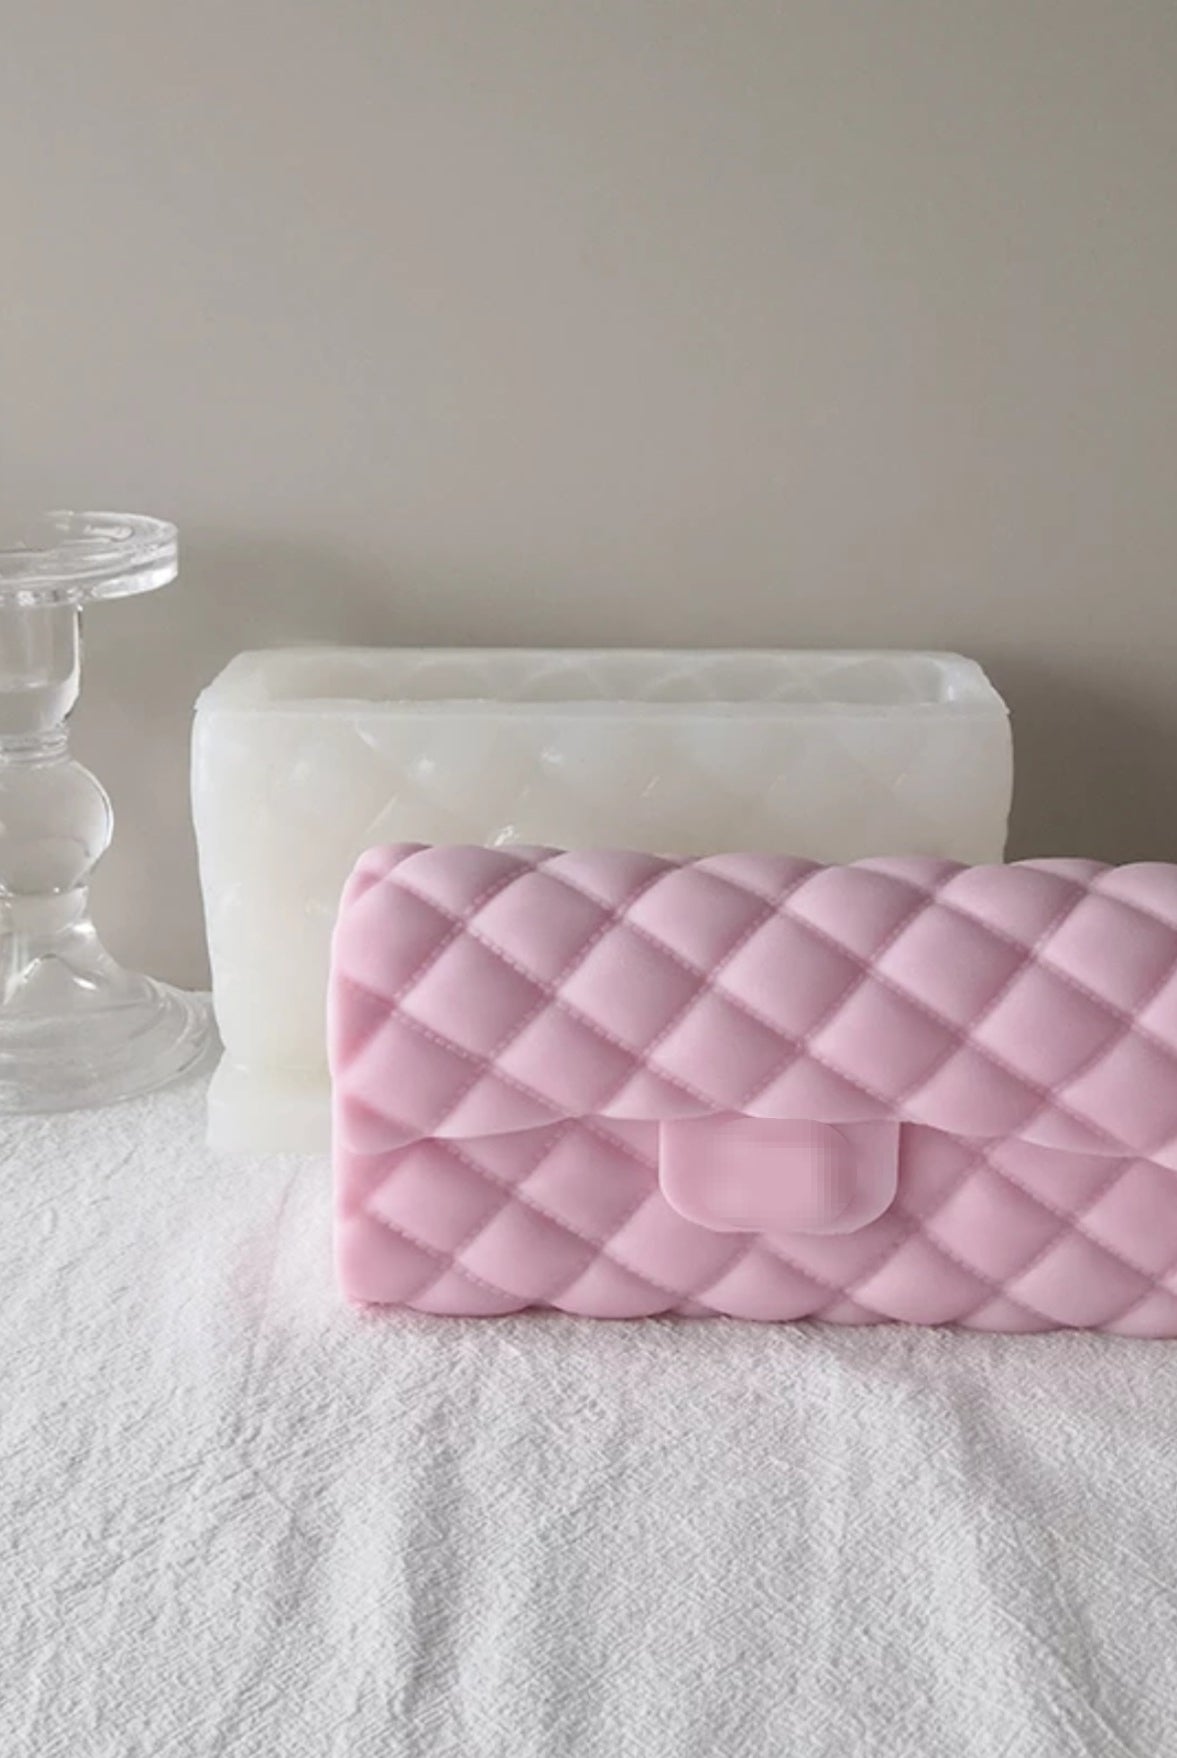 Designer Handbag Large 9 0 - Silicone Mould, Mold for DIY Candles. Created using candle making kit with cotton candle wicks and candle colour chips. Using soy wax for pillar candles. Sold by Myka Candles Moulds Australia